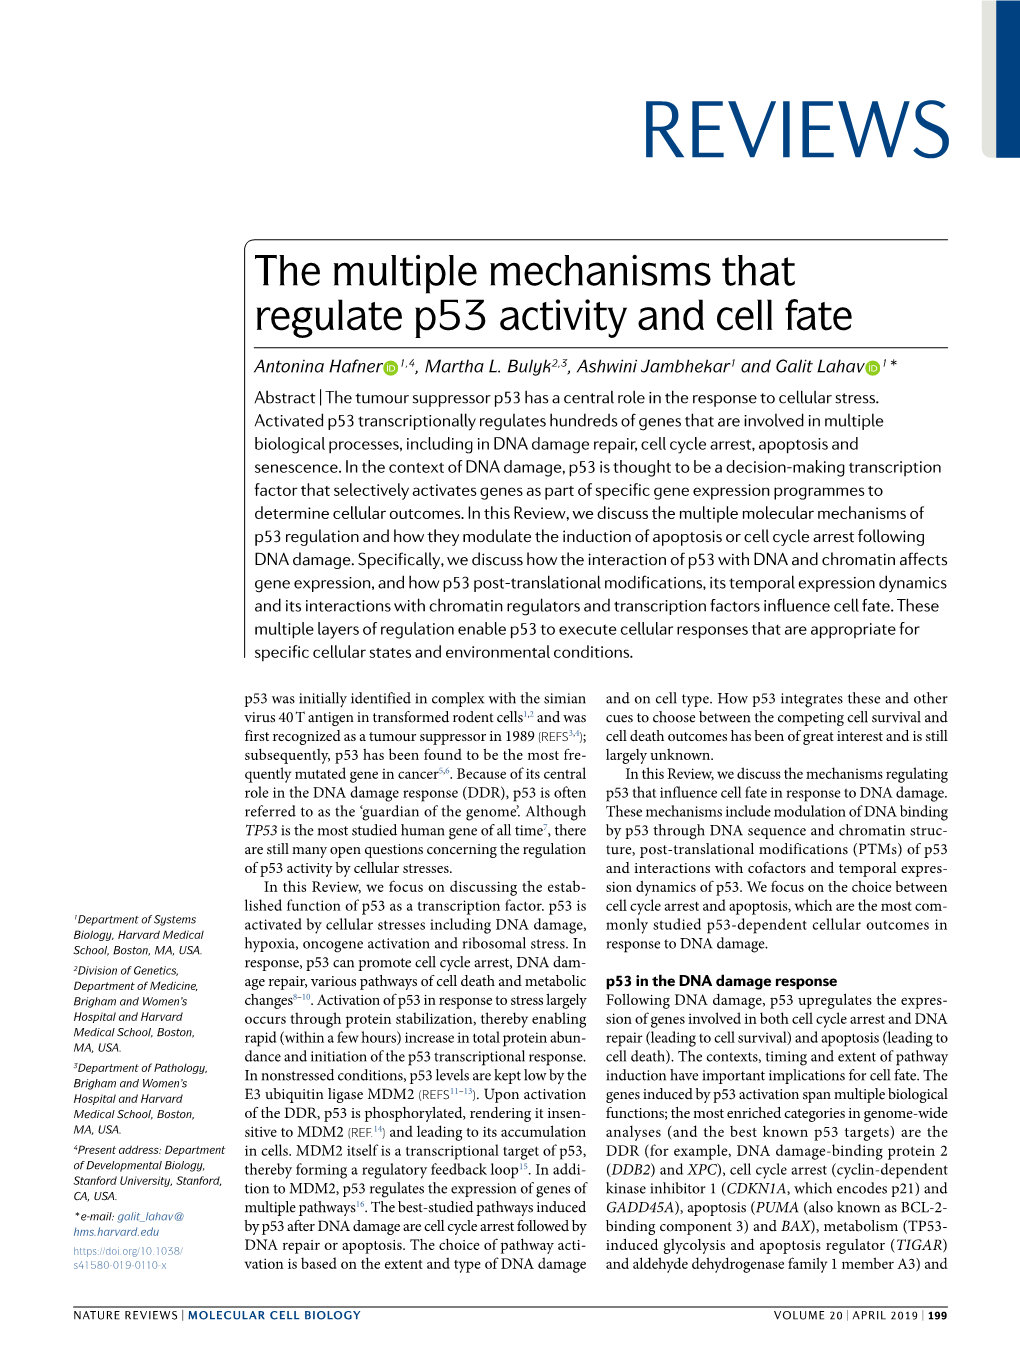 The Multiple Mechanisms That Regulate P53 Activity and Cell Fate